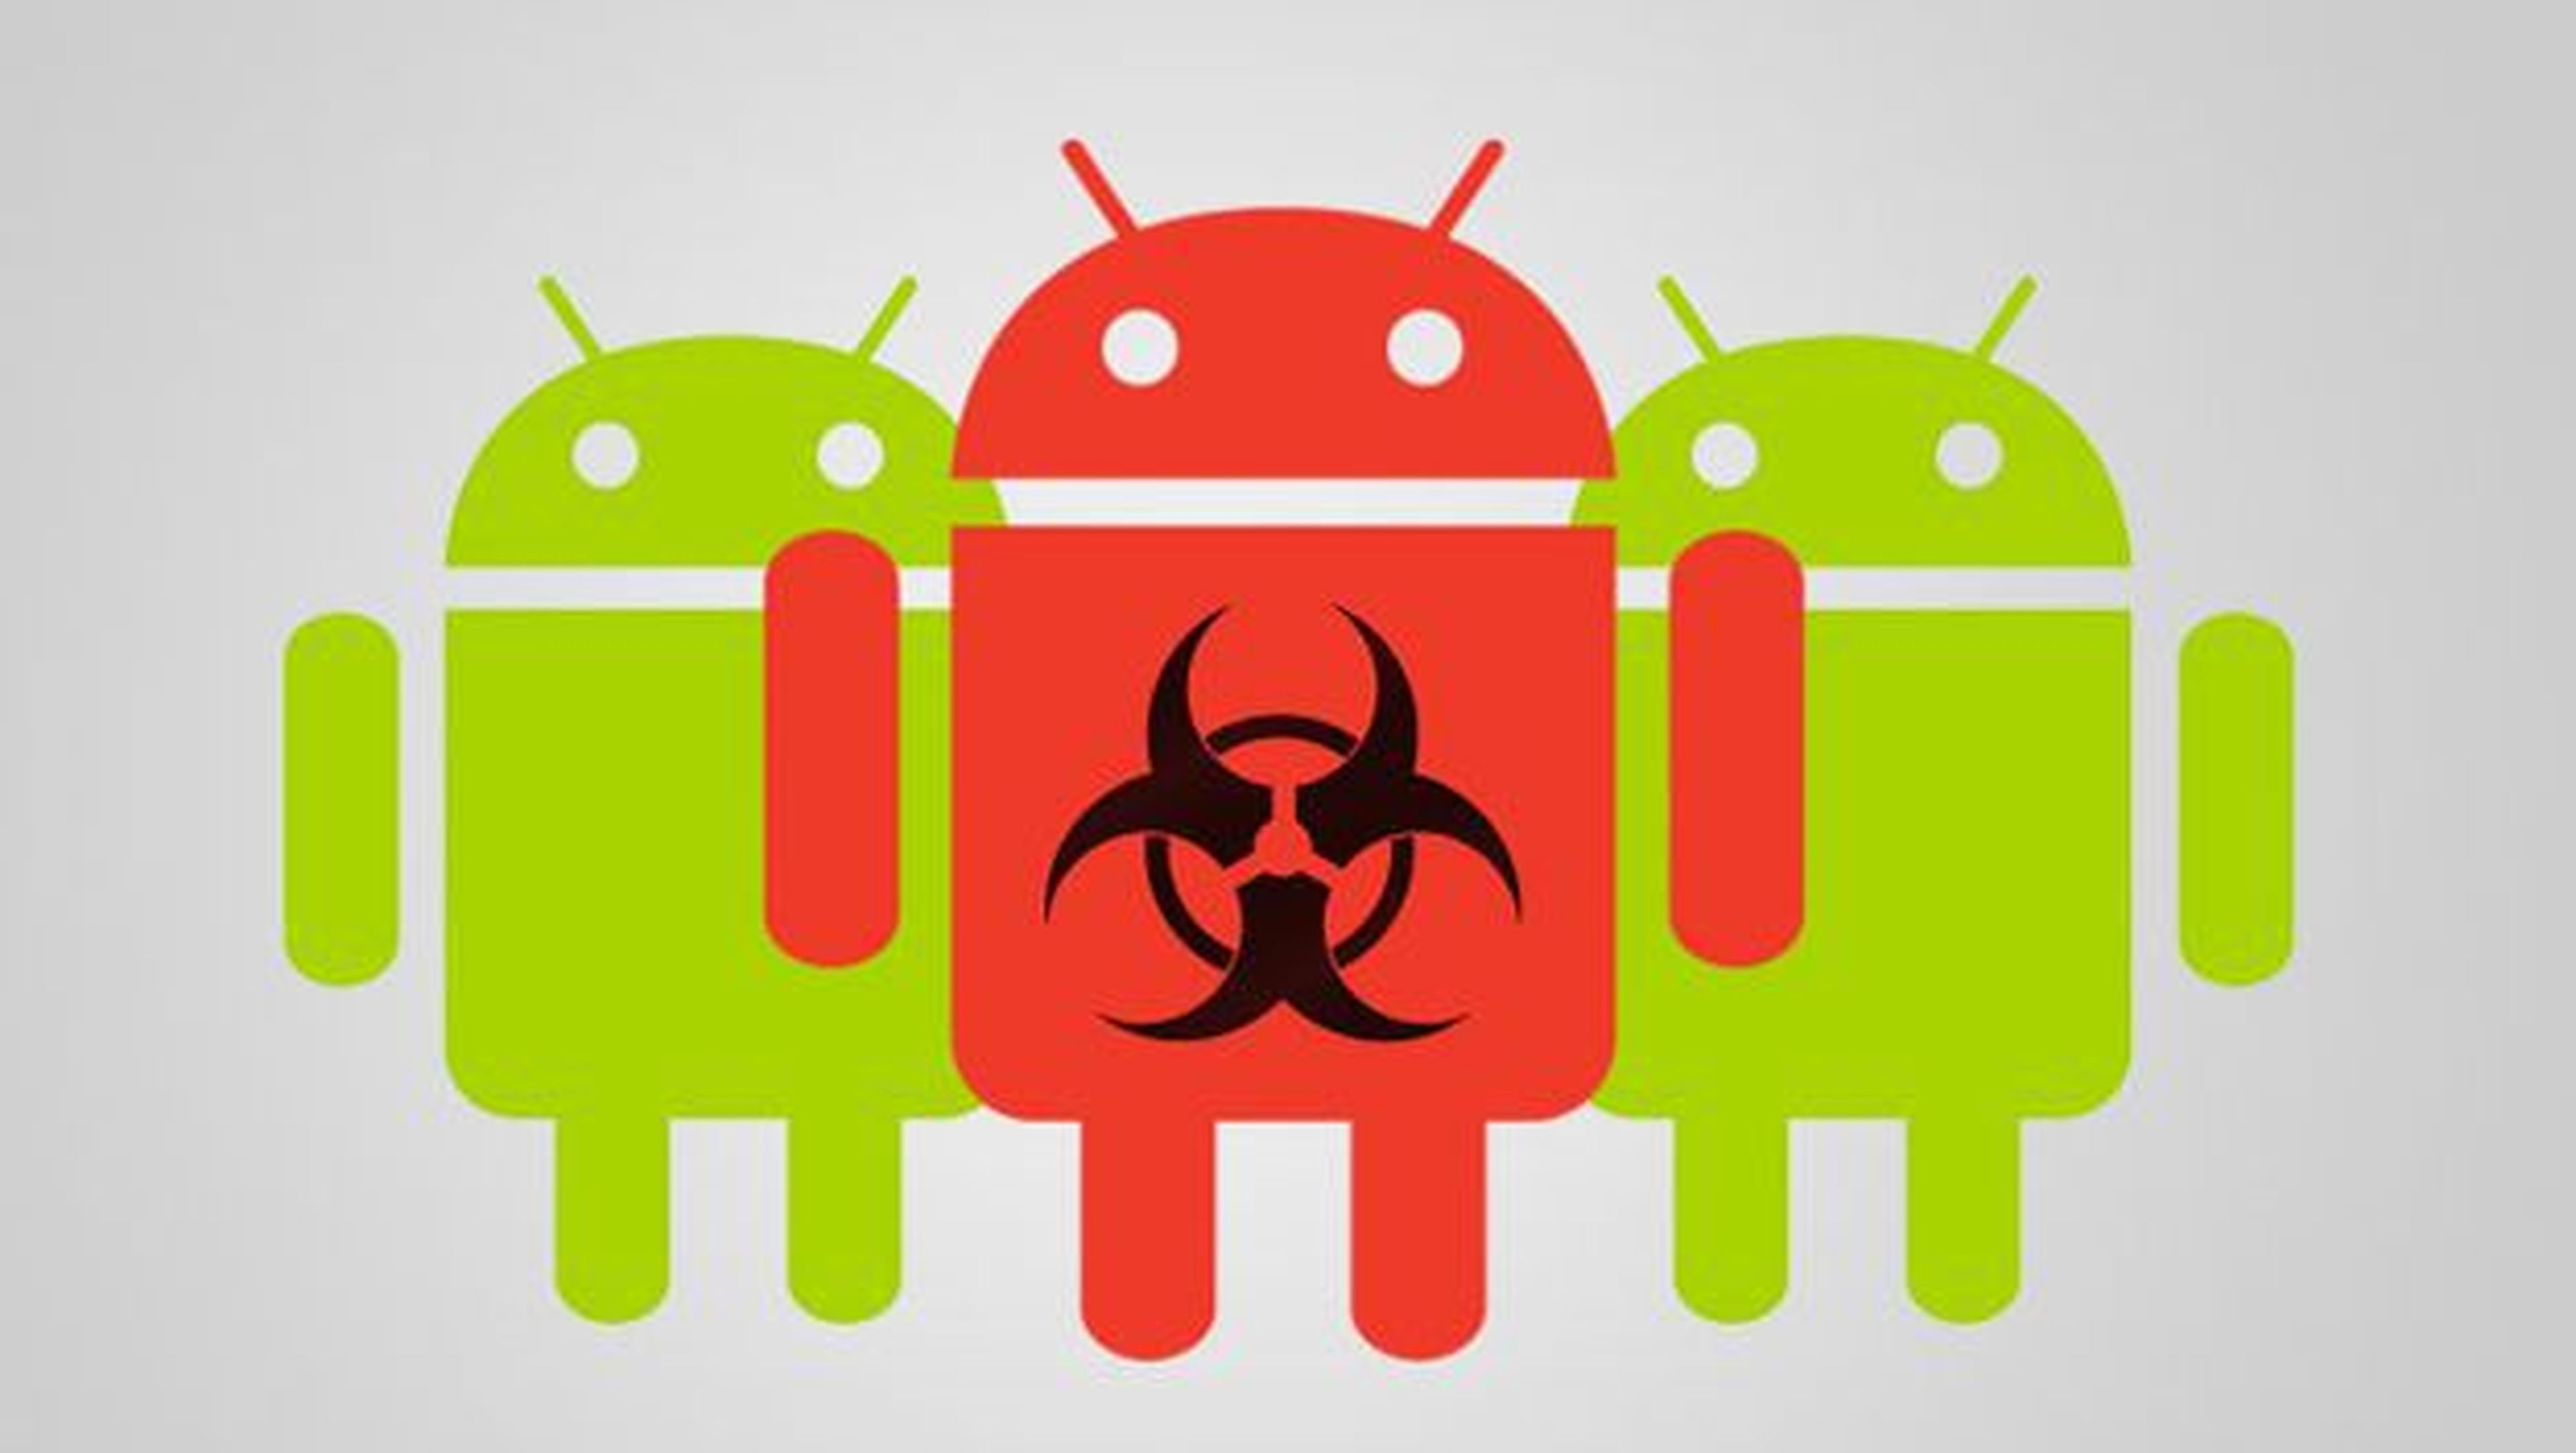 ransomware android